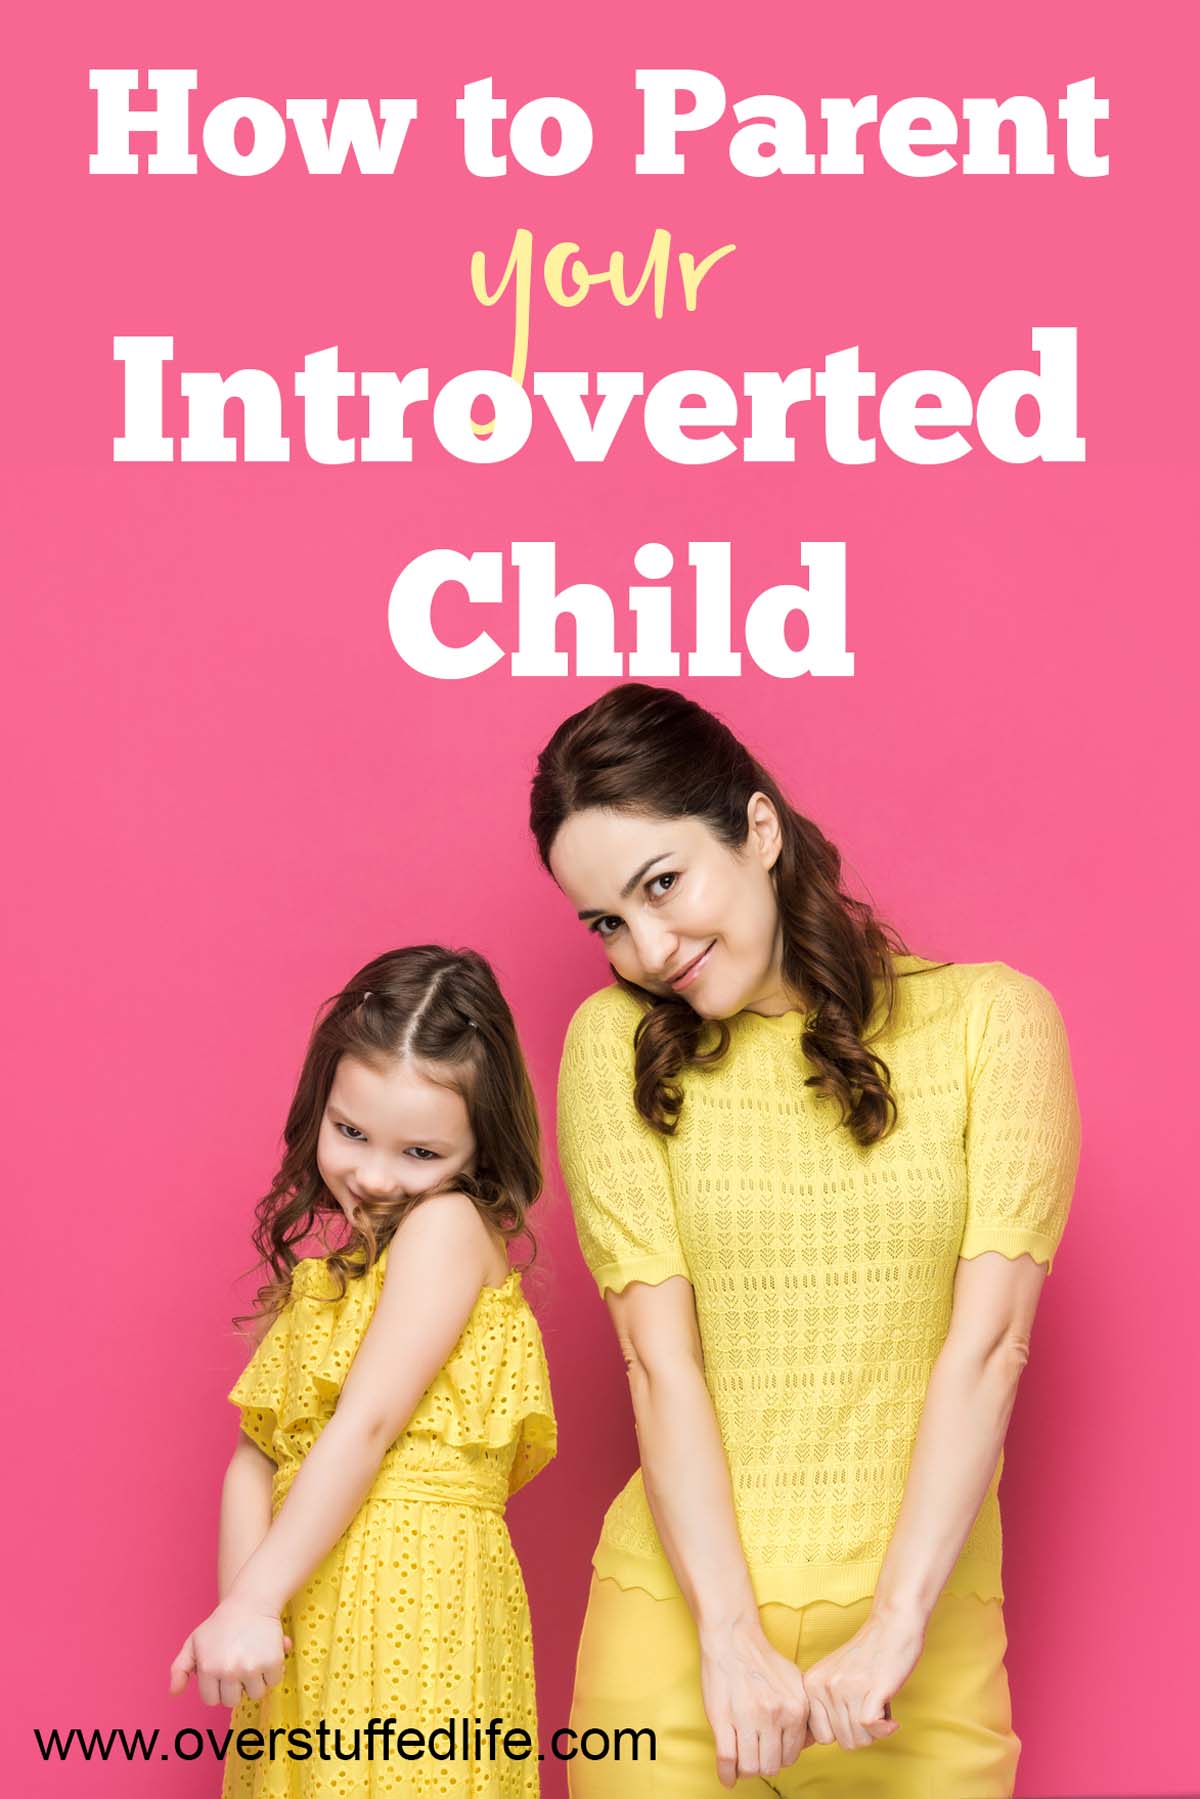 Do you have an introverted child who struggles when meeting new people or with social interaction in general? Sometimes parents aren't sure how to best support their introverted children, especially if they are not introverted themselves.